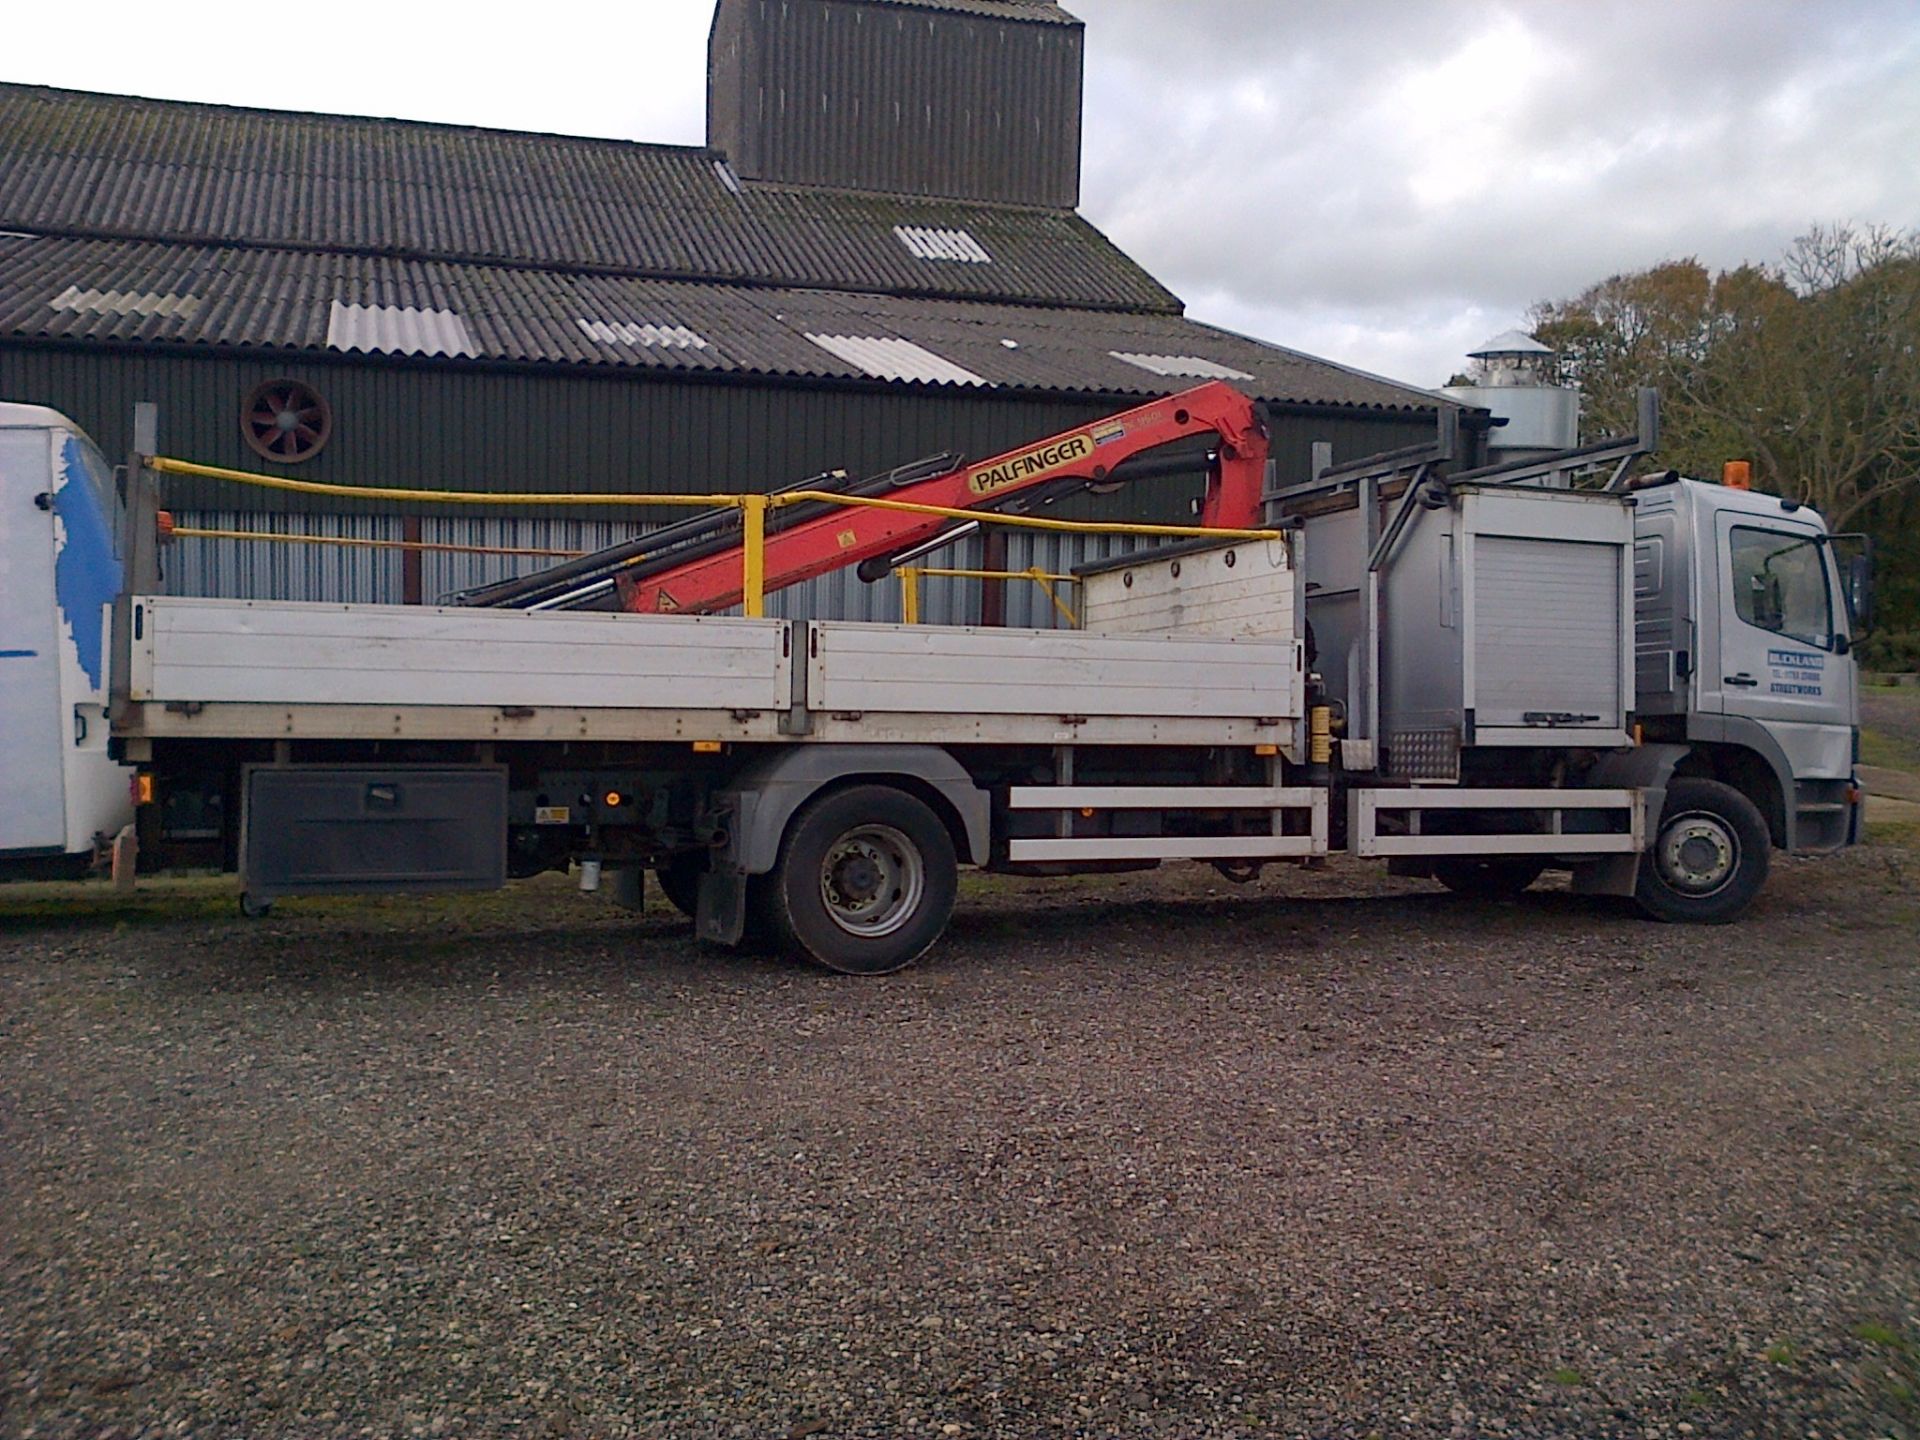 2004 Mercedes Drop Side Lorry With Palfinger Crane.